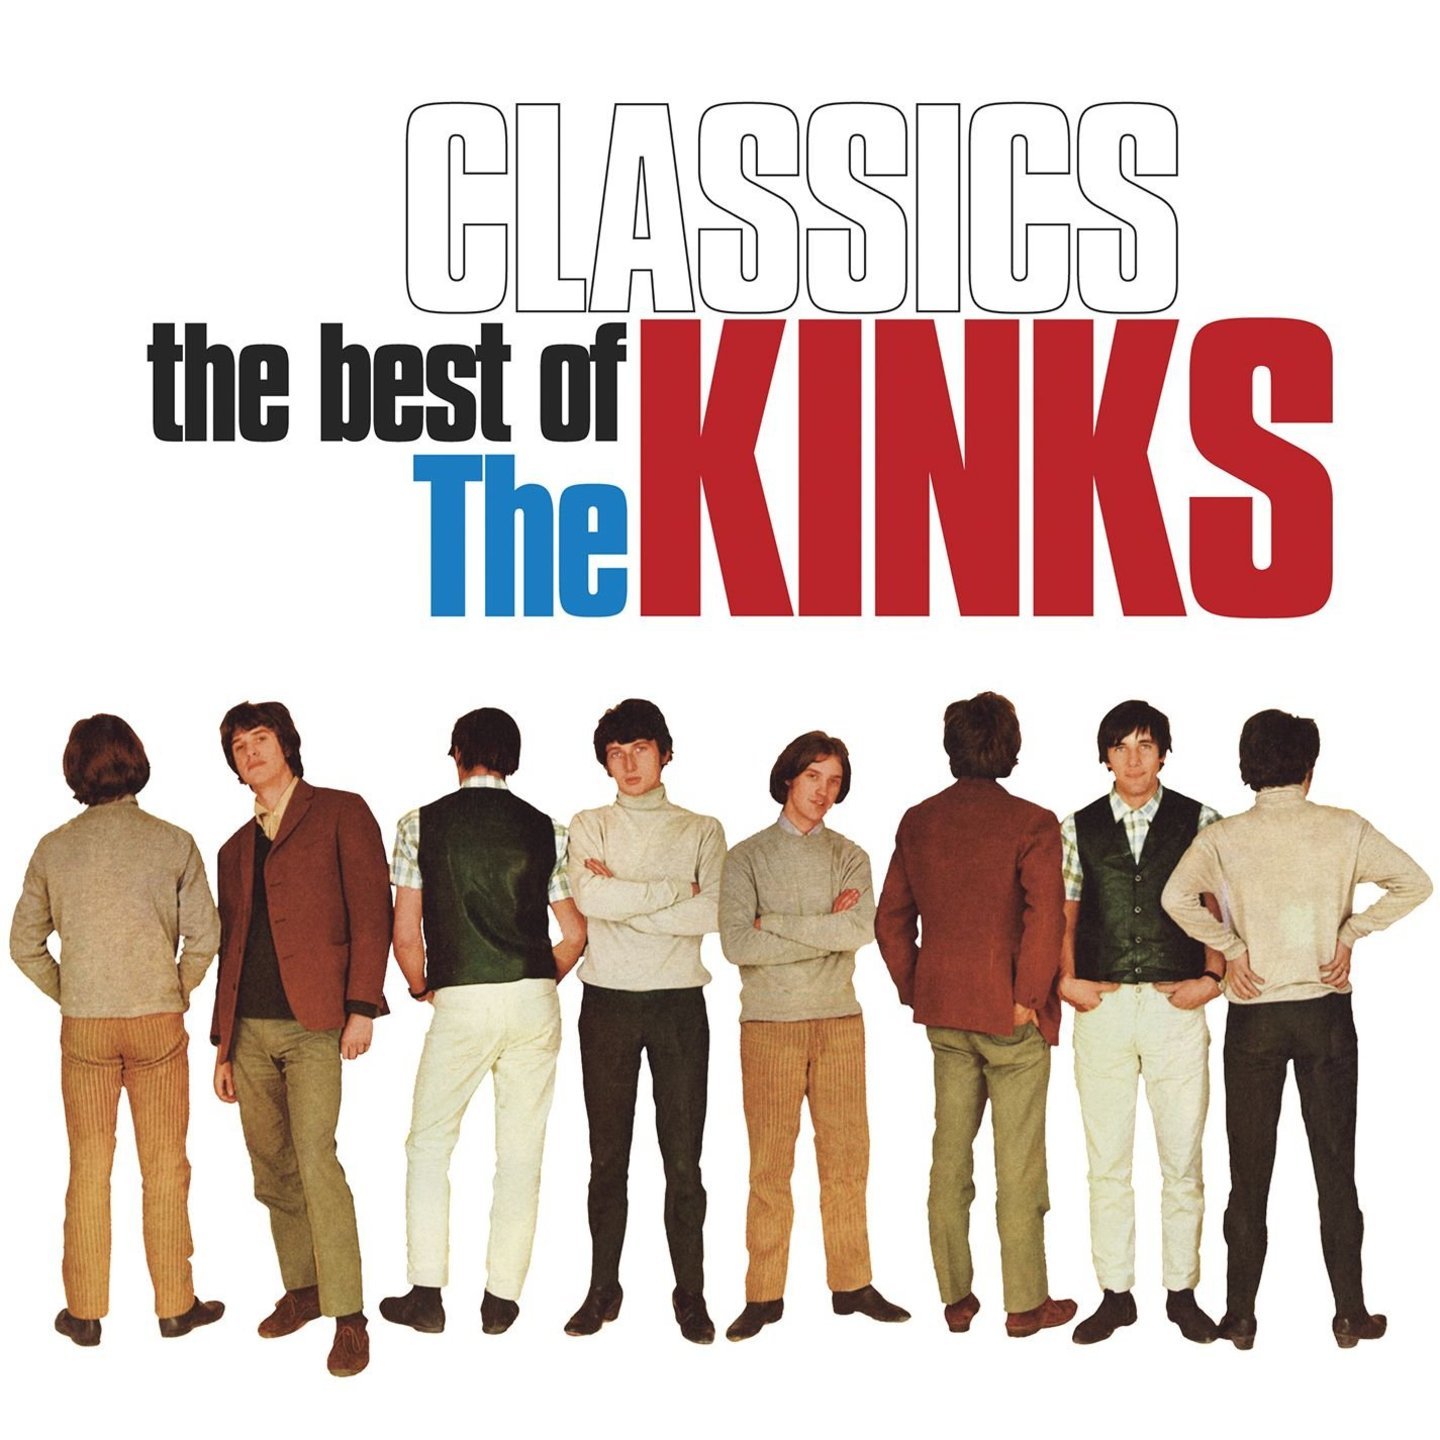 KINKS, THE - The Best Of The Kinks 1964 - 1970 LP